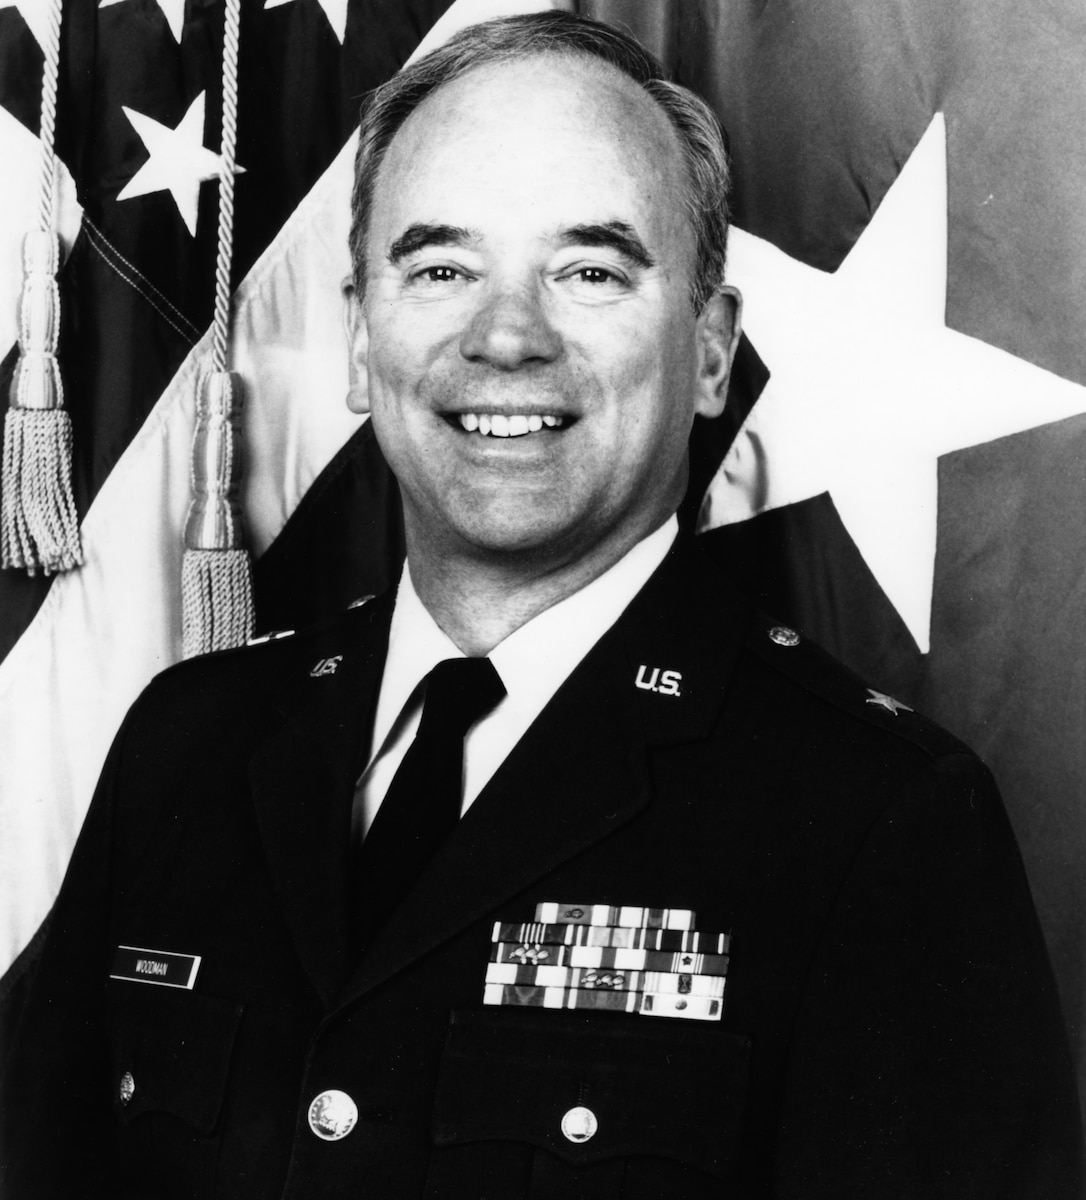 This is the official portrait of Brigadier General Donald King Woodman.